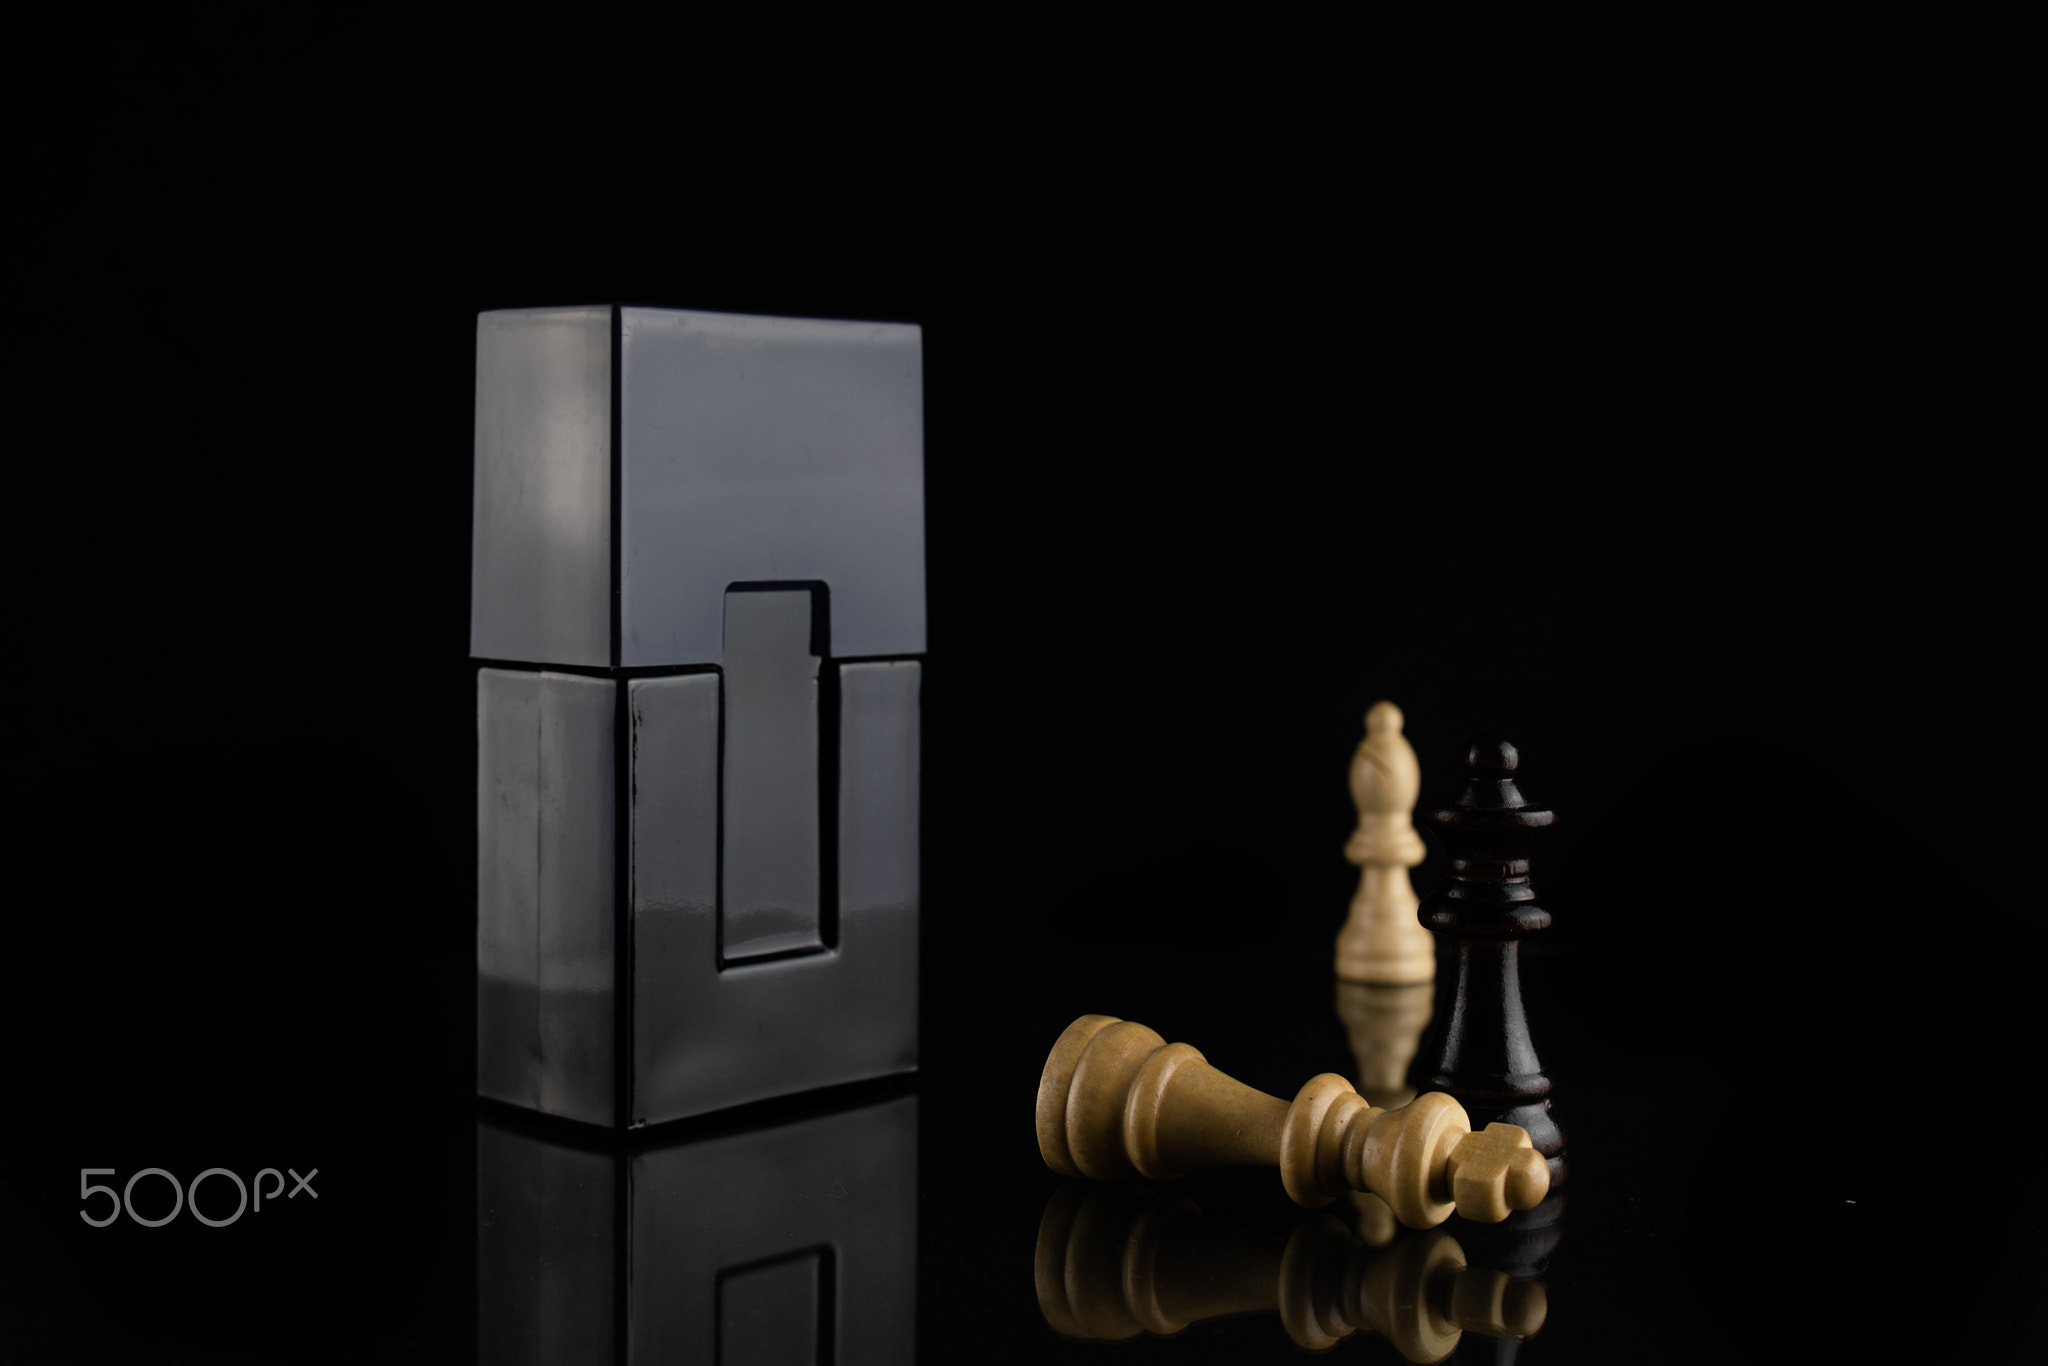 chess pieces on black background